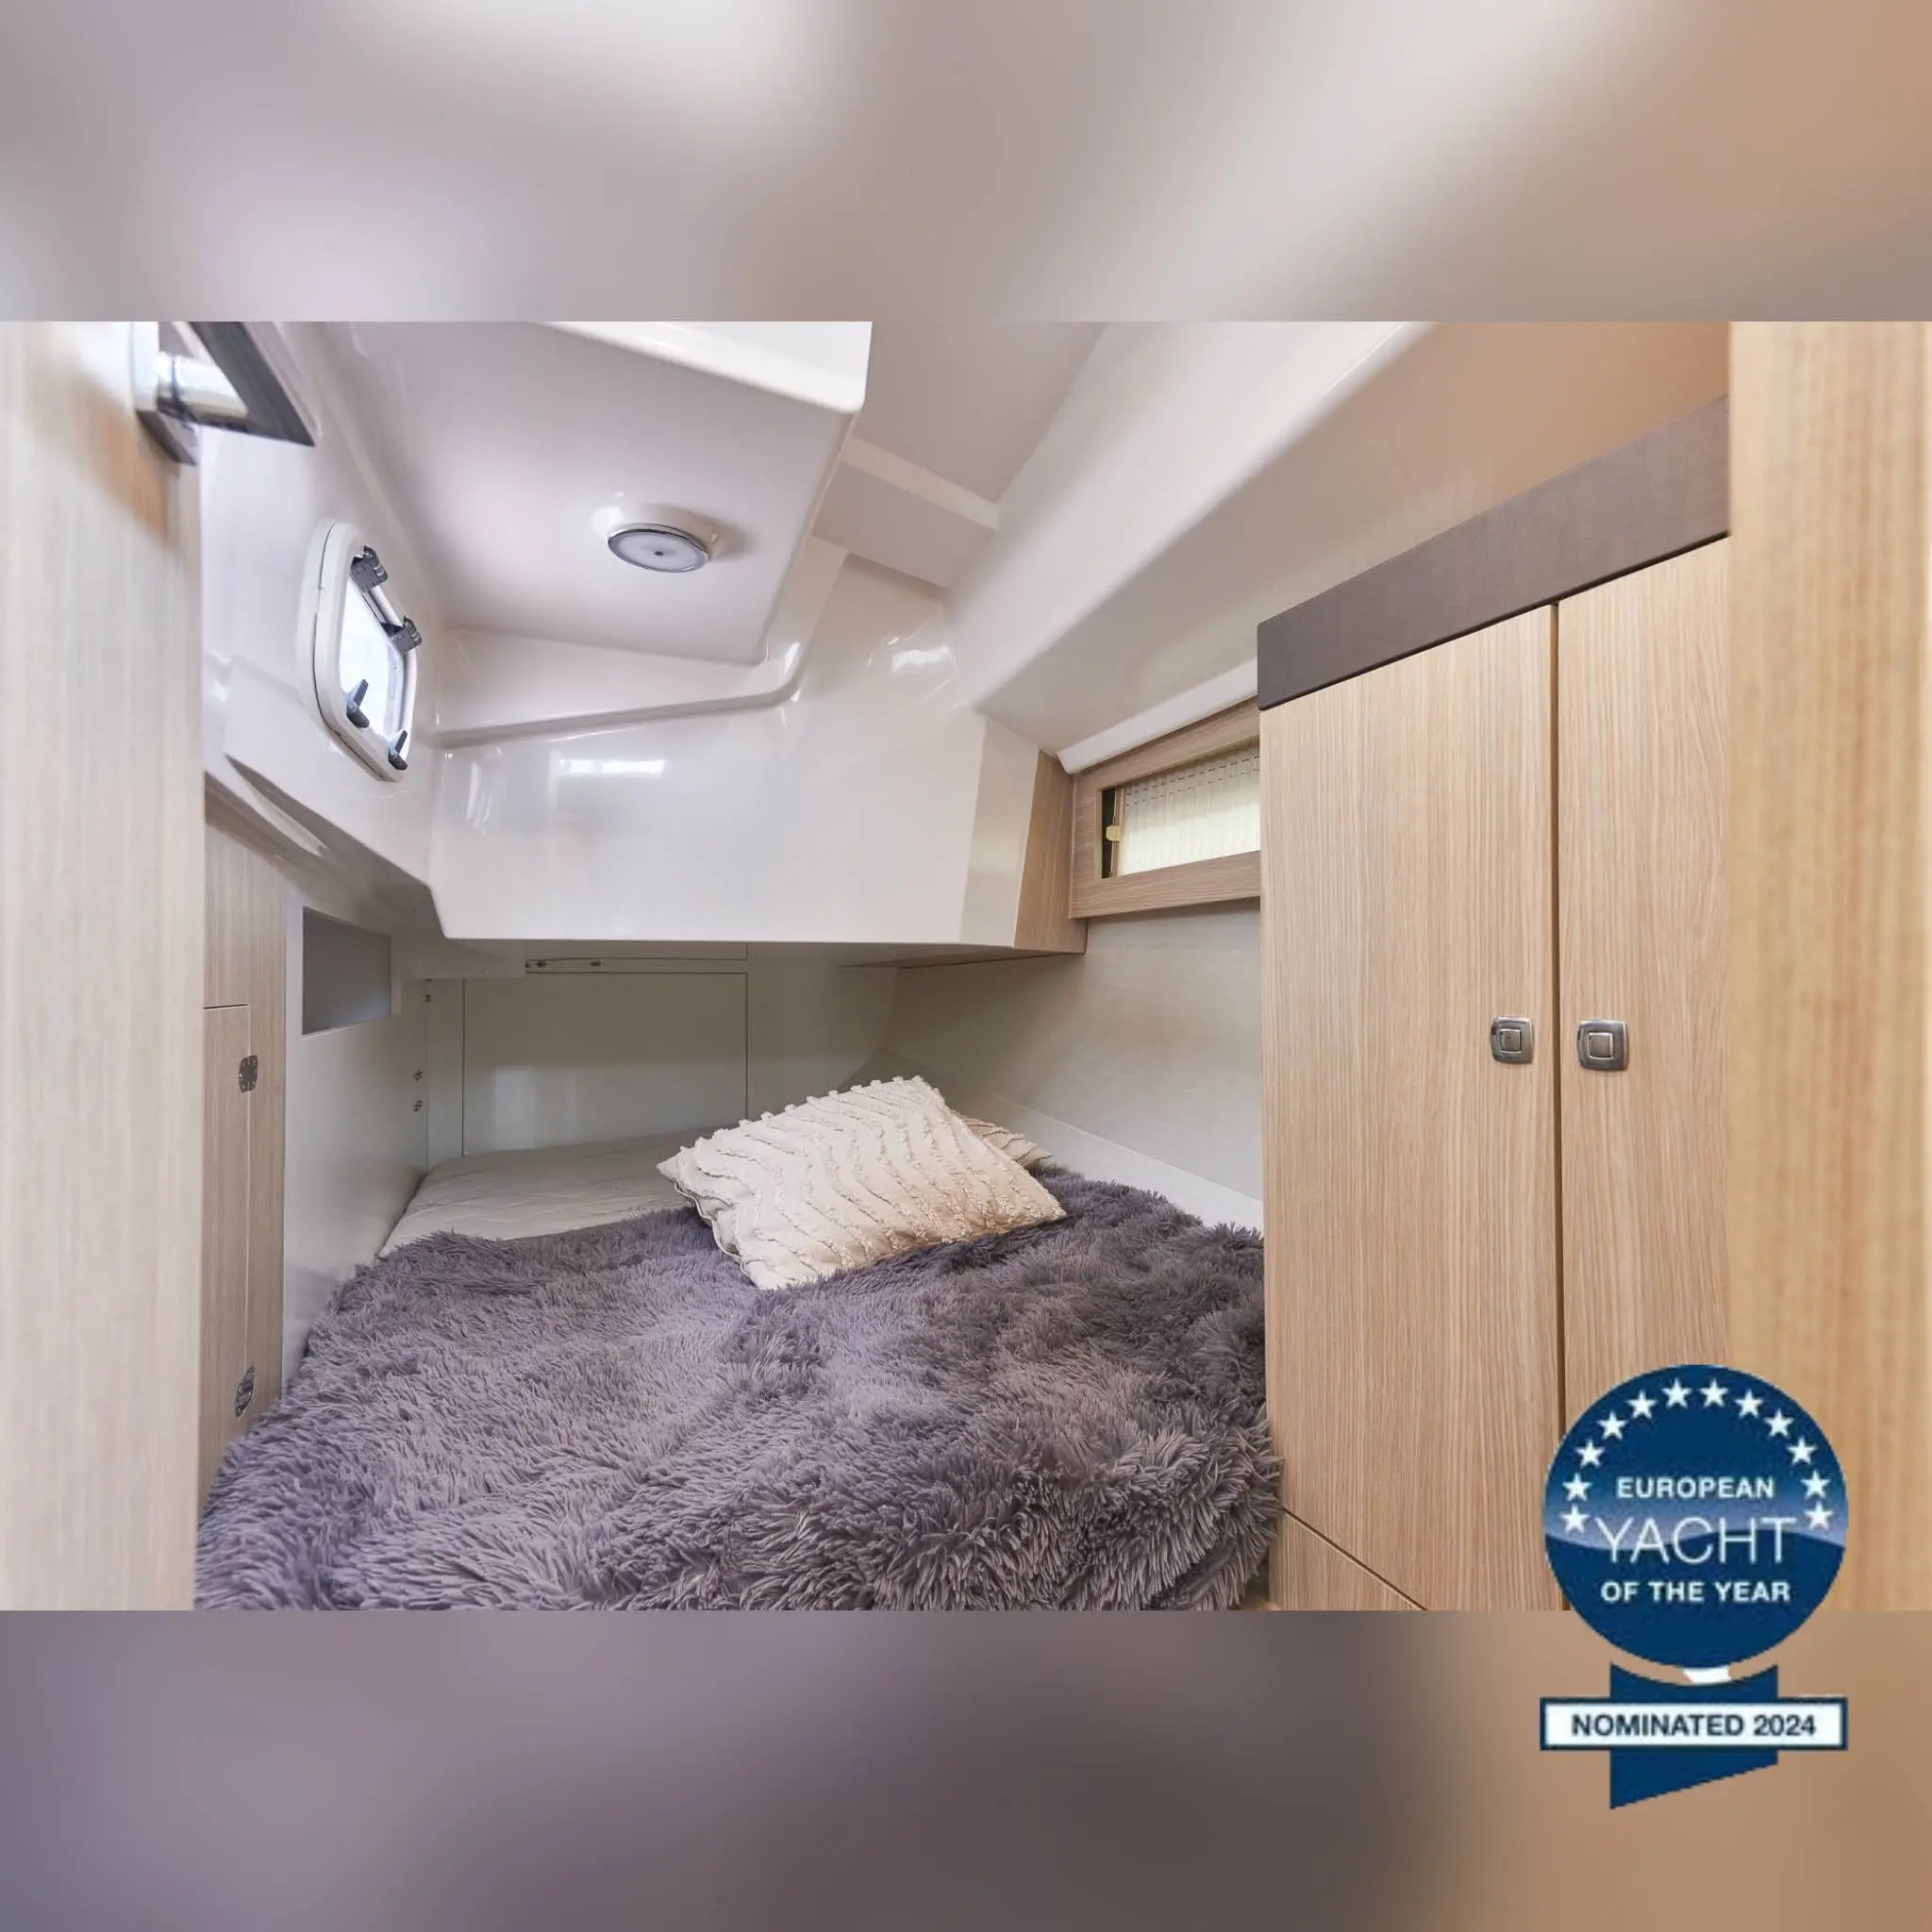 Maxus 35 (see with our base extra options availability as Air Conditioned) - 